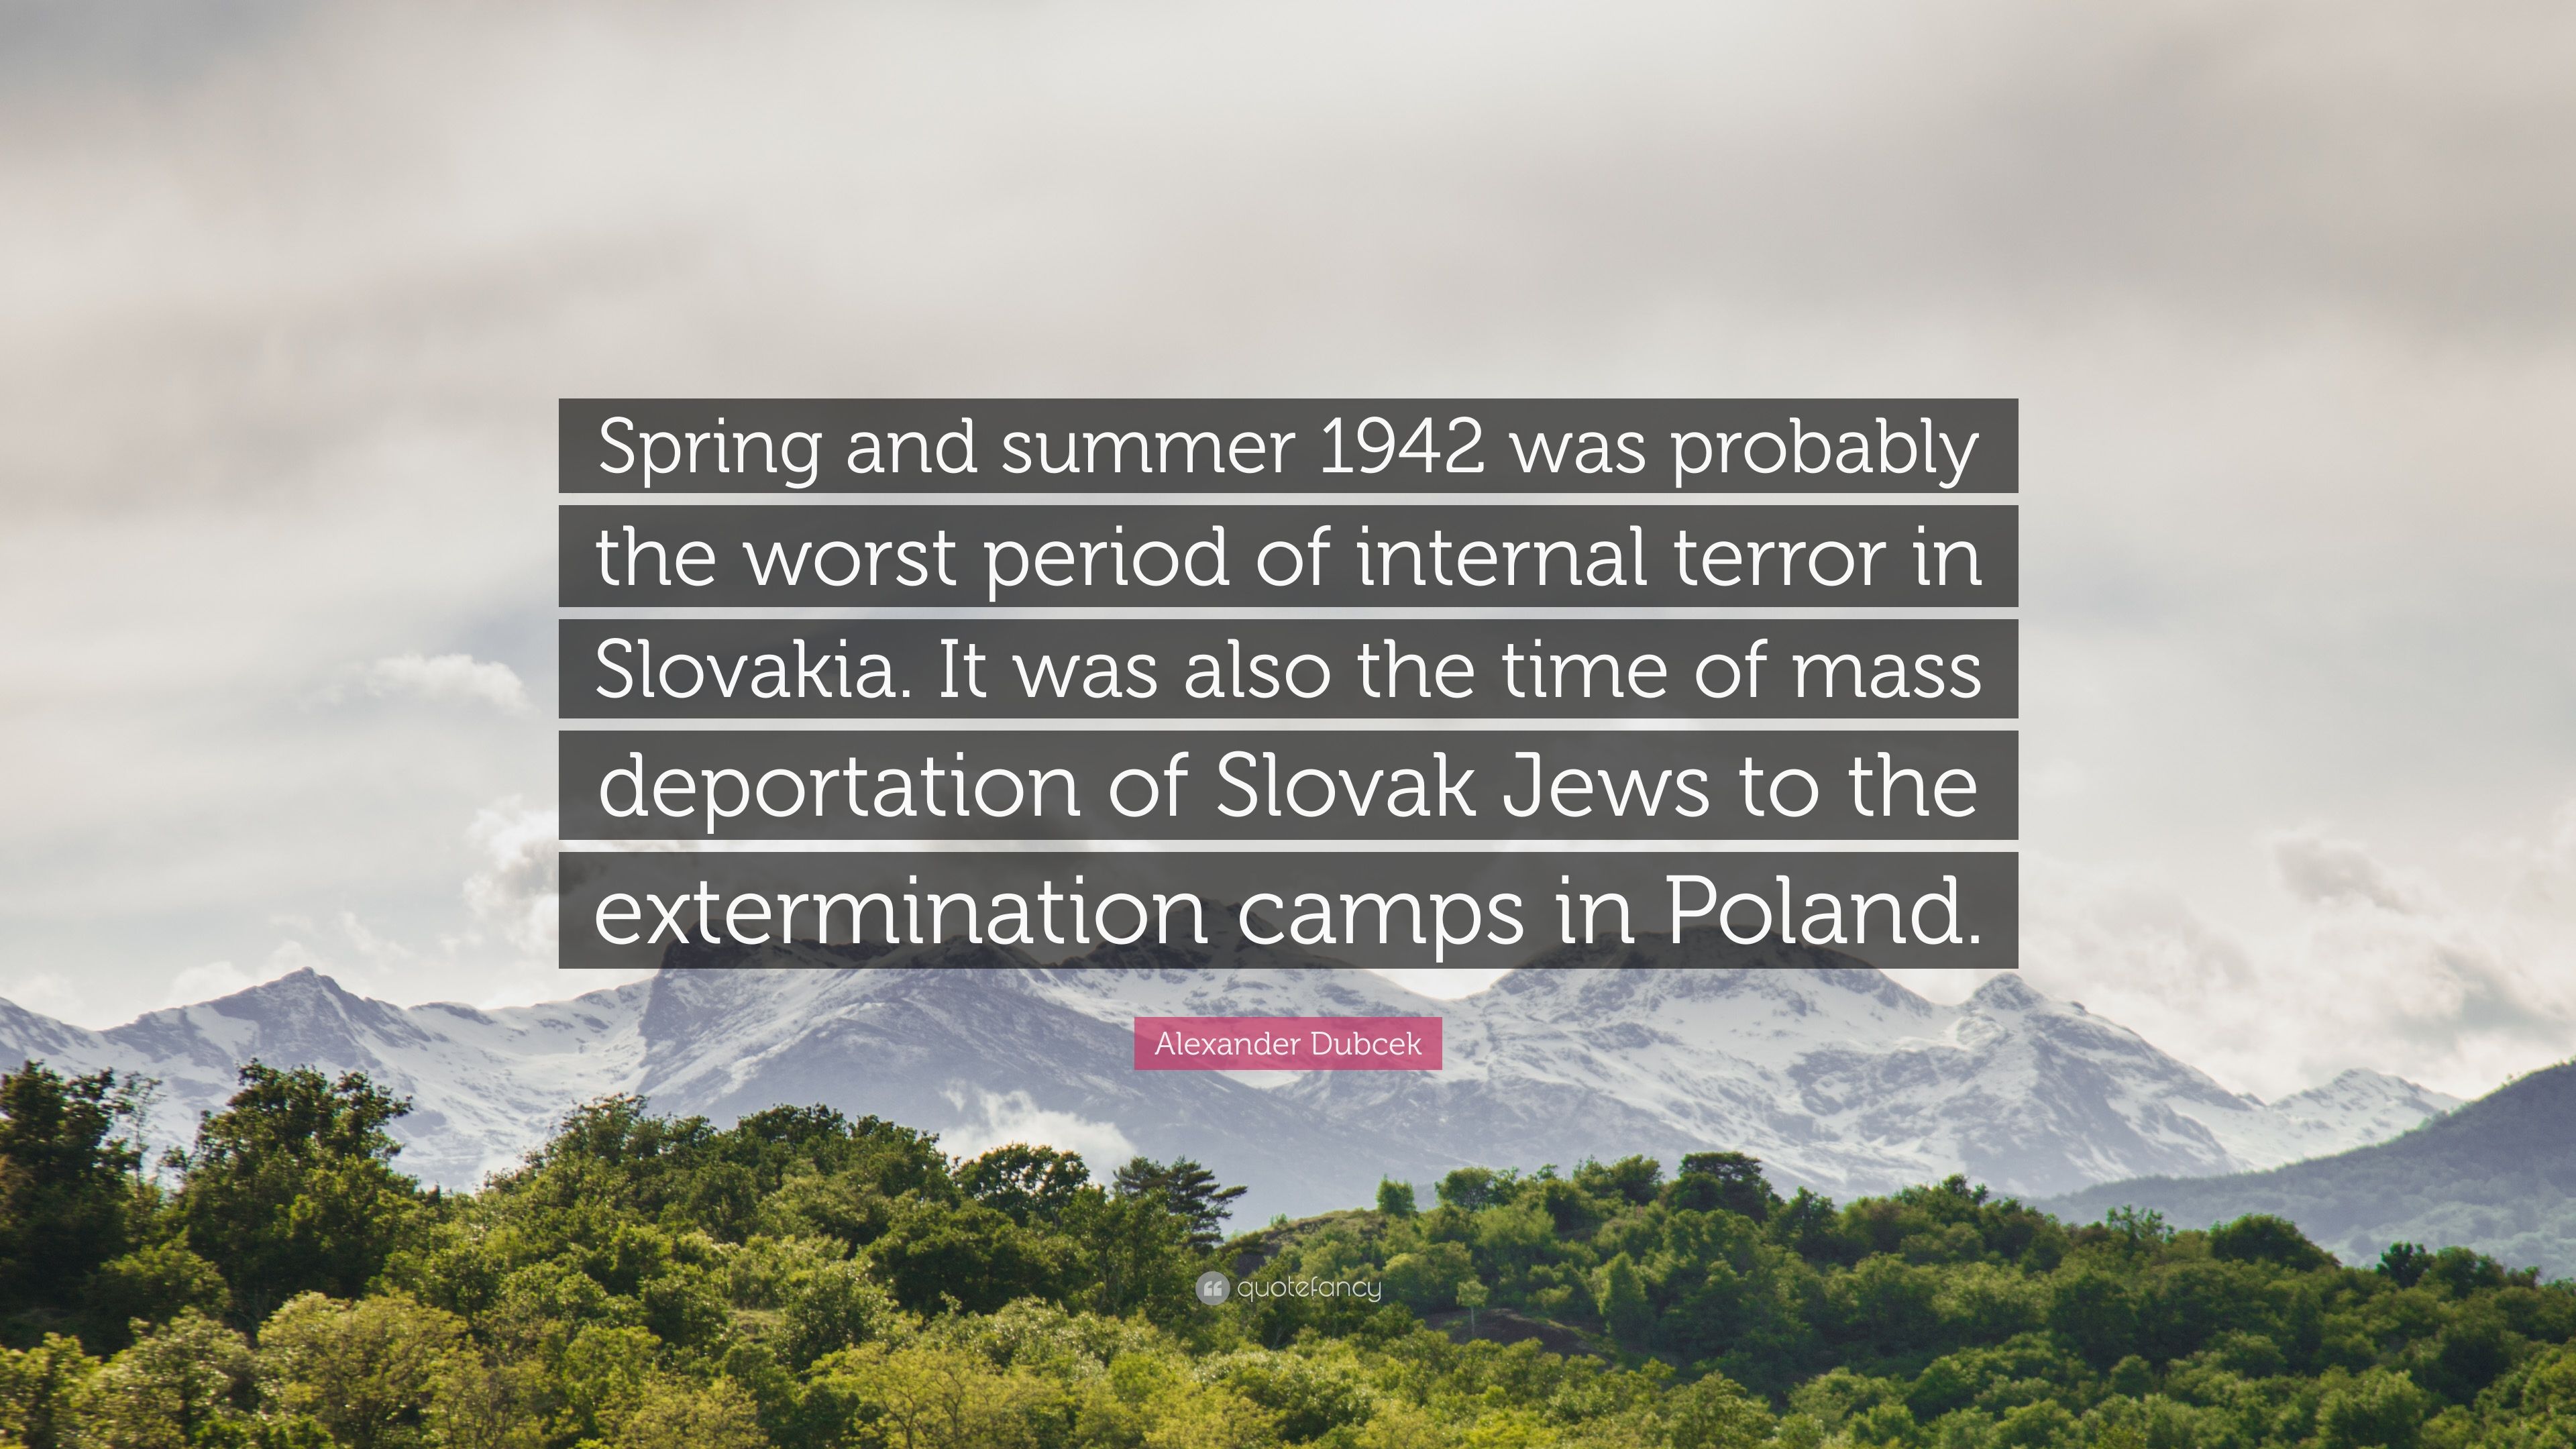 Alexander Dubcek Quote: “Spring and summer 1942 was probably